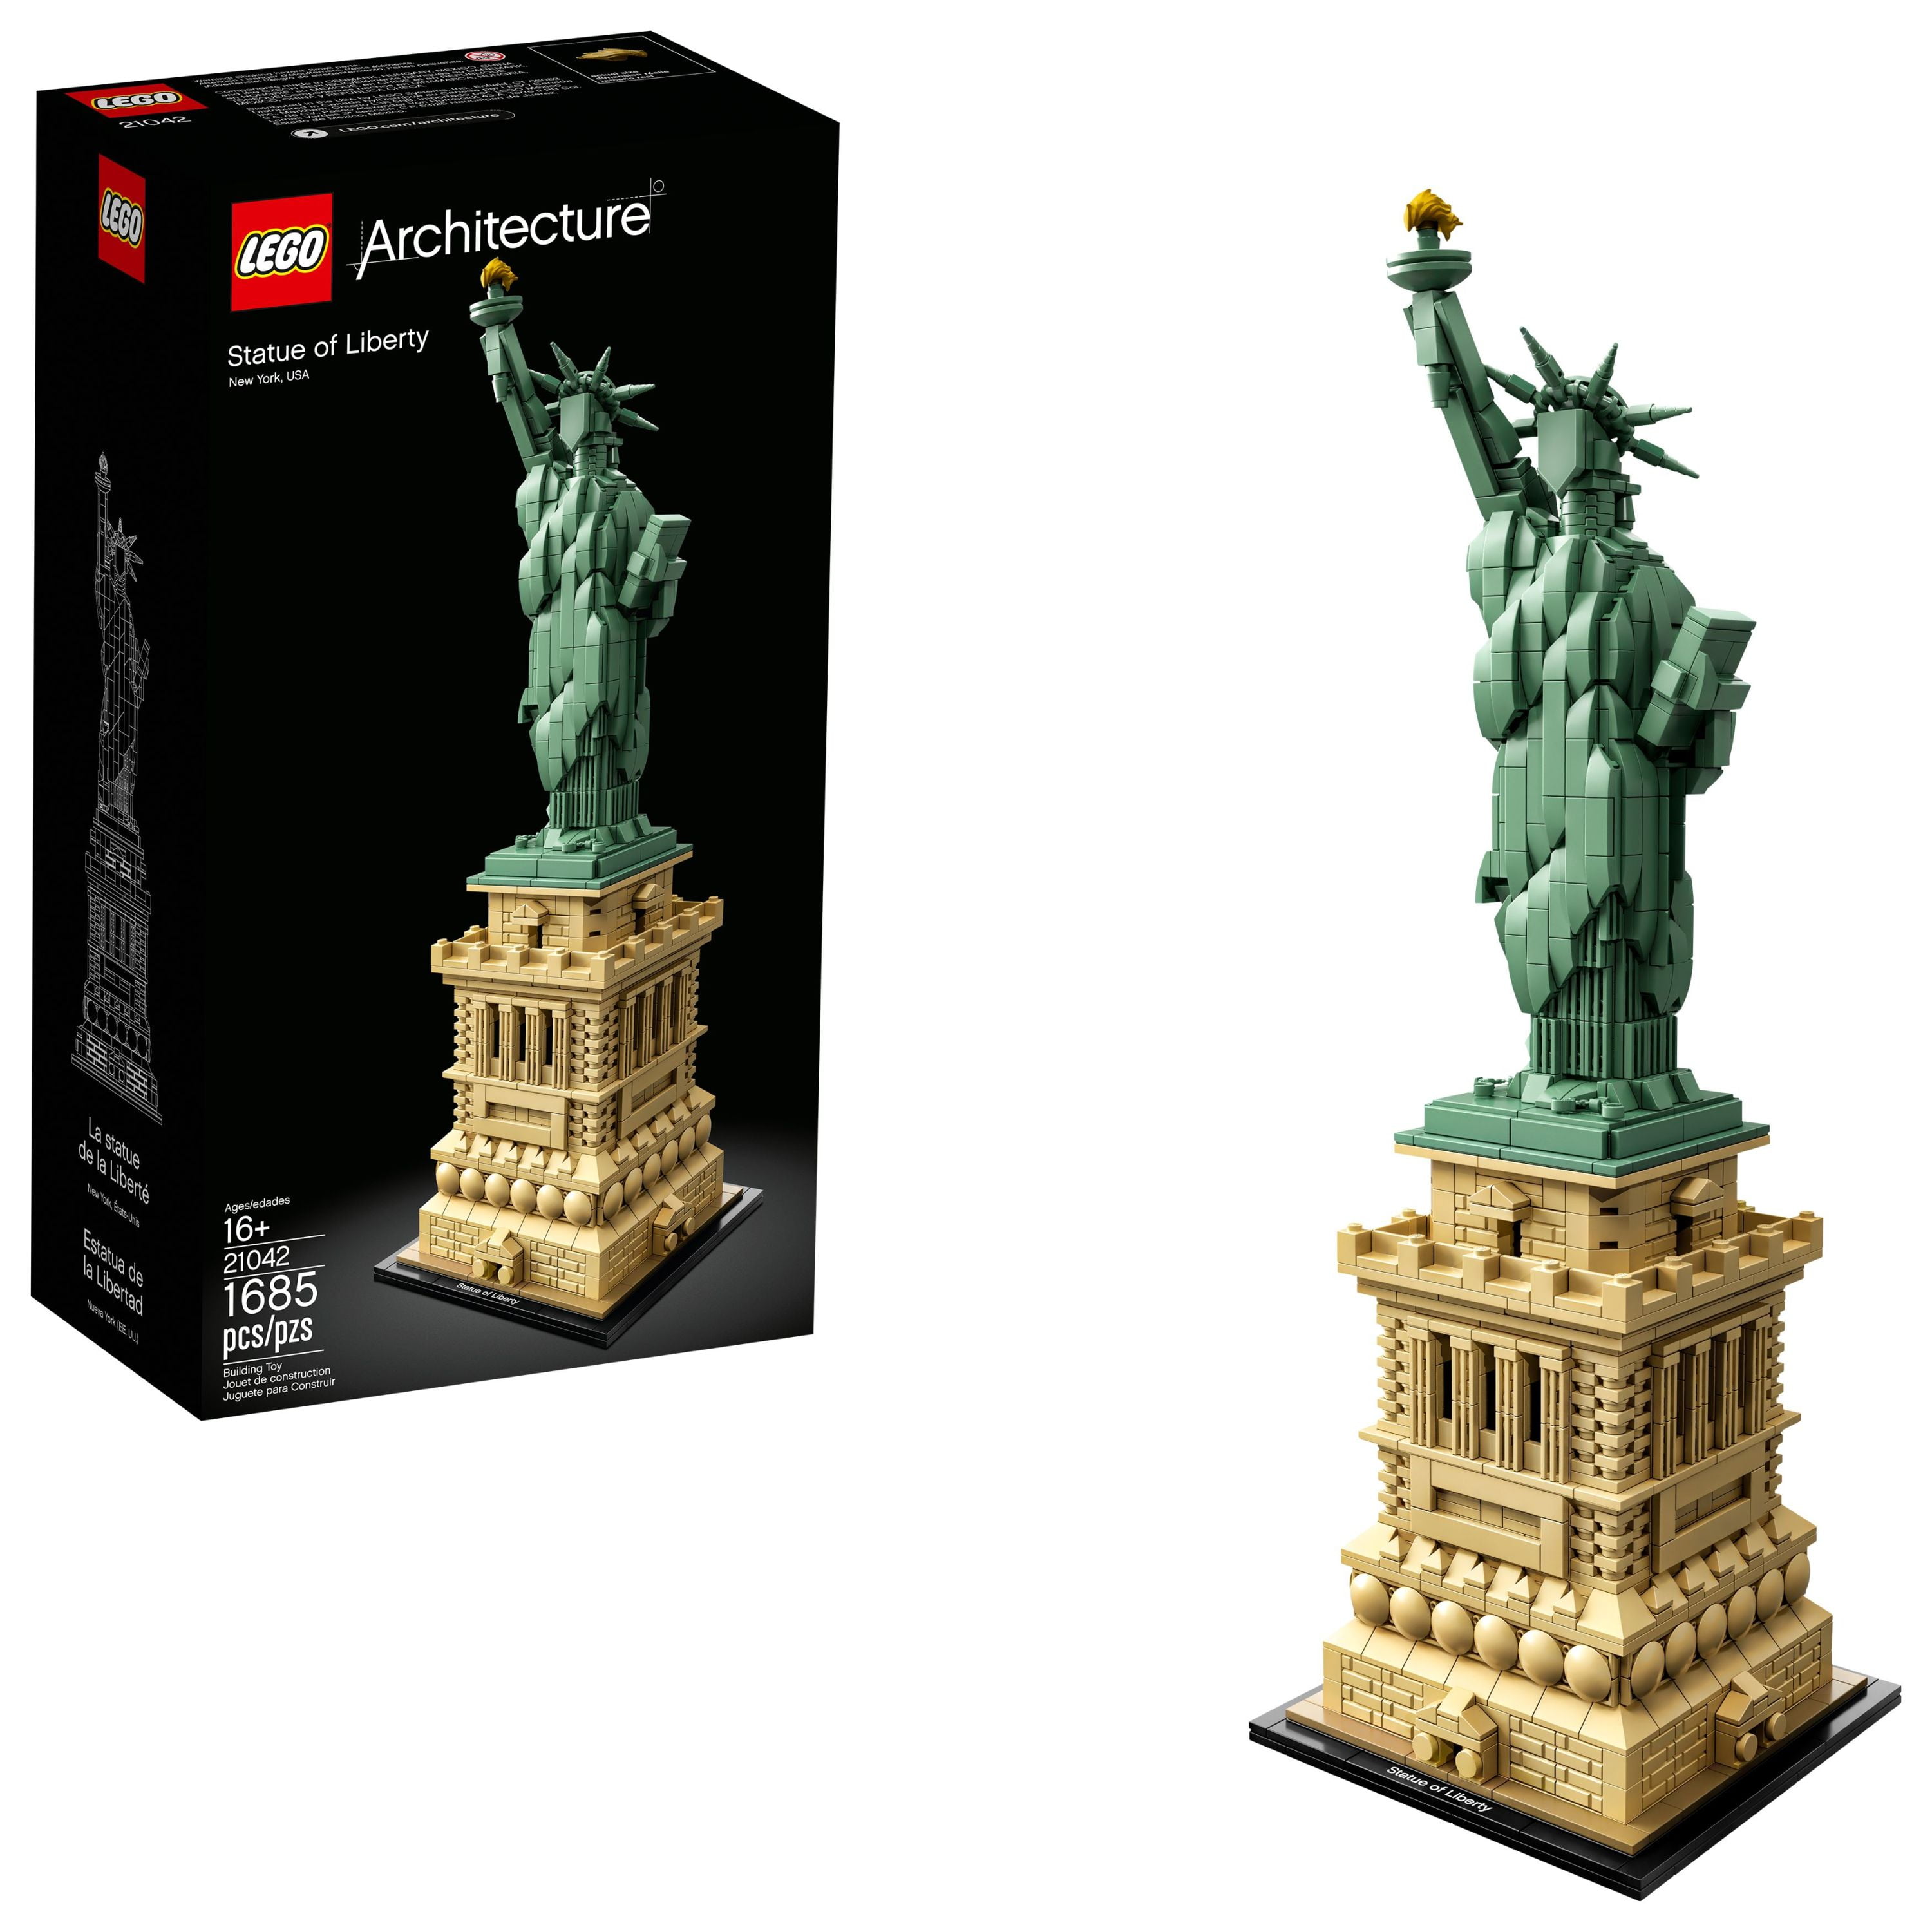 Set of 3 NYC Statue of Liberty,Freedom & Empire Building Statue Figures 5 in 